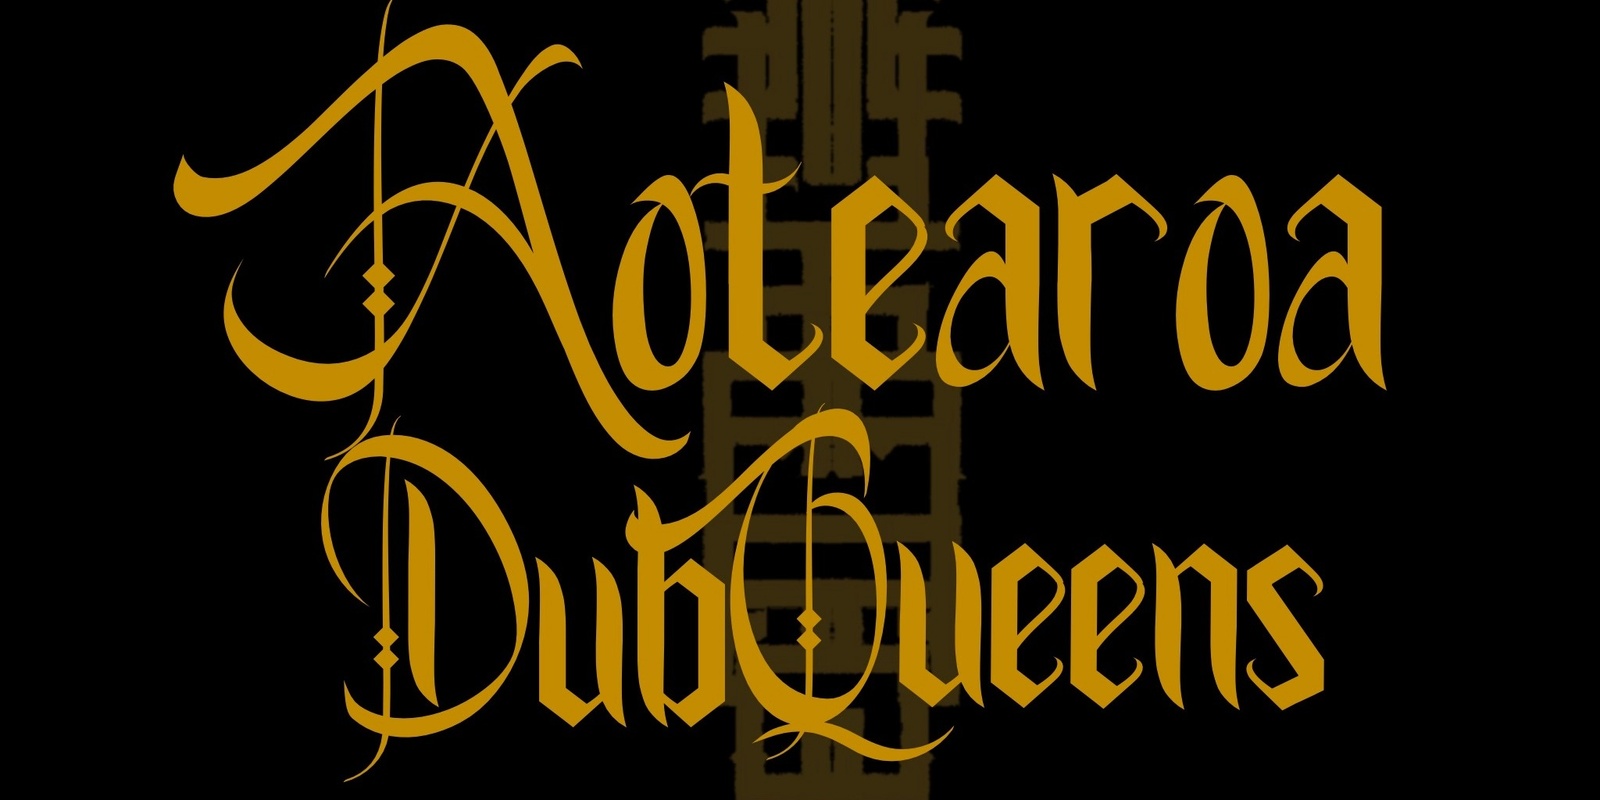 Banner image for Dub Queens